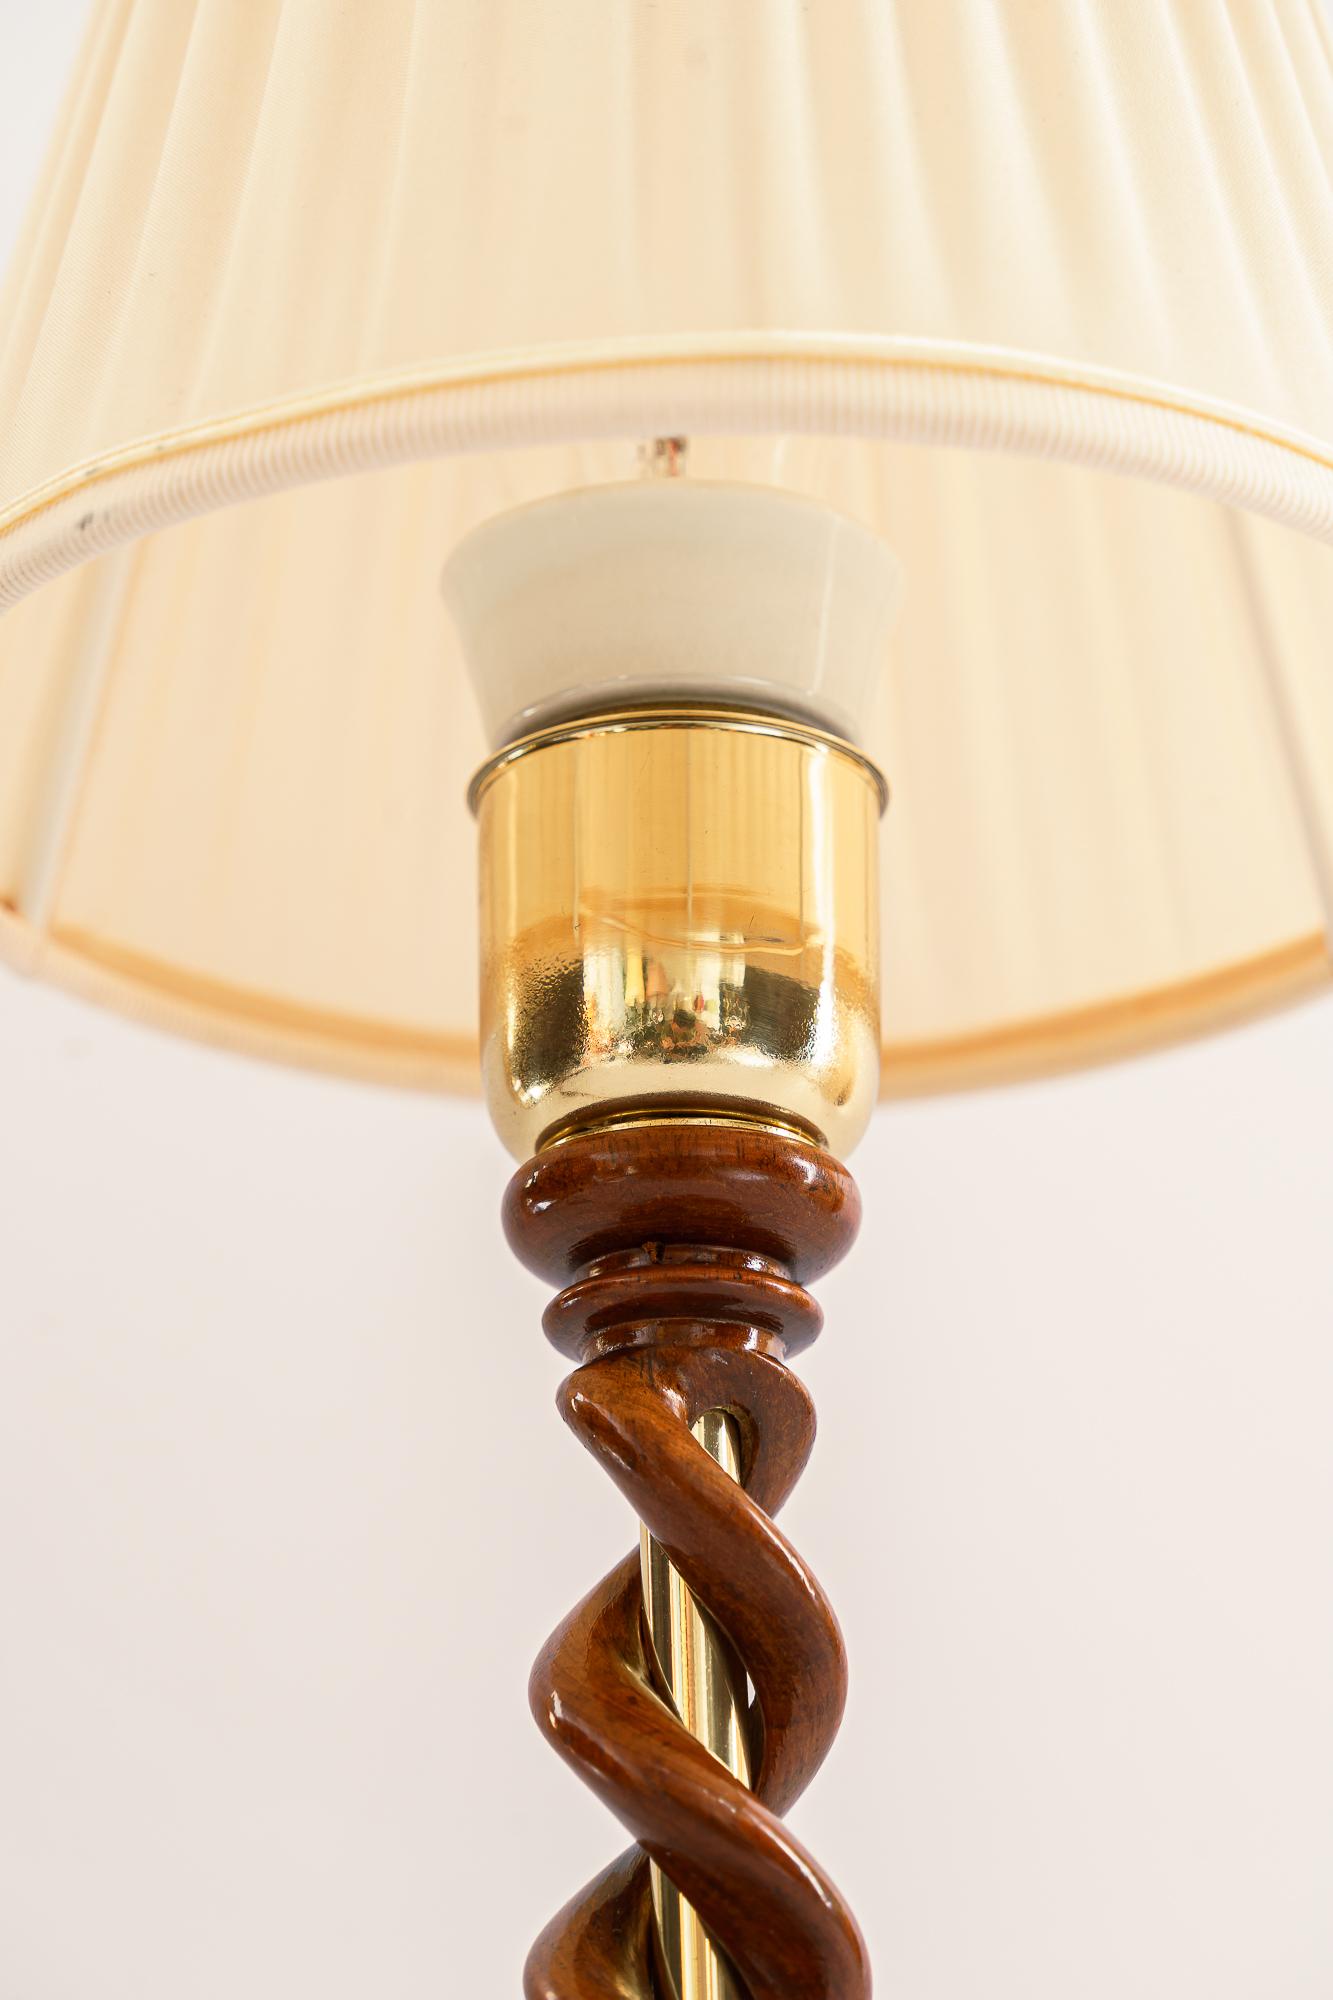 Austrian Art Deco Wood Lamp with Fabric Shade, Vienna, Around 1920s For Sale